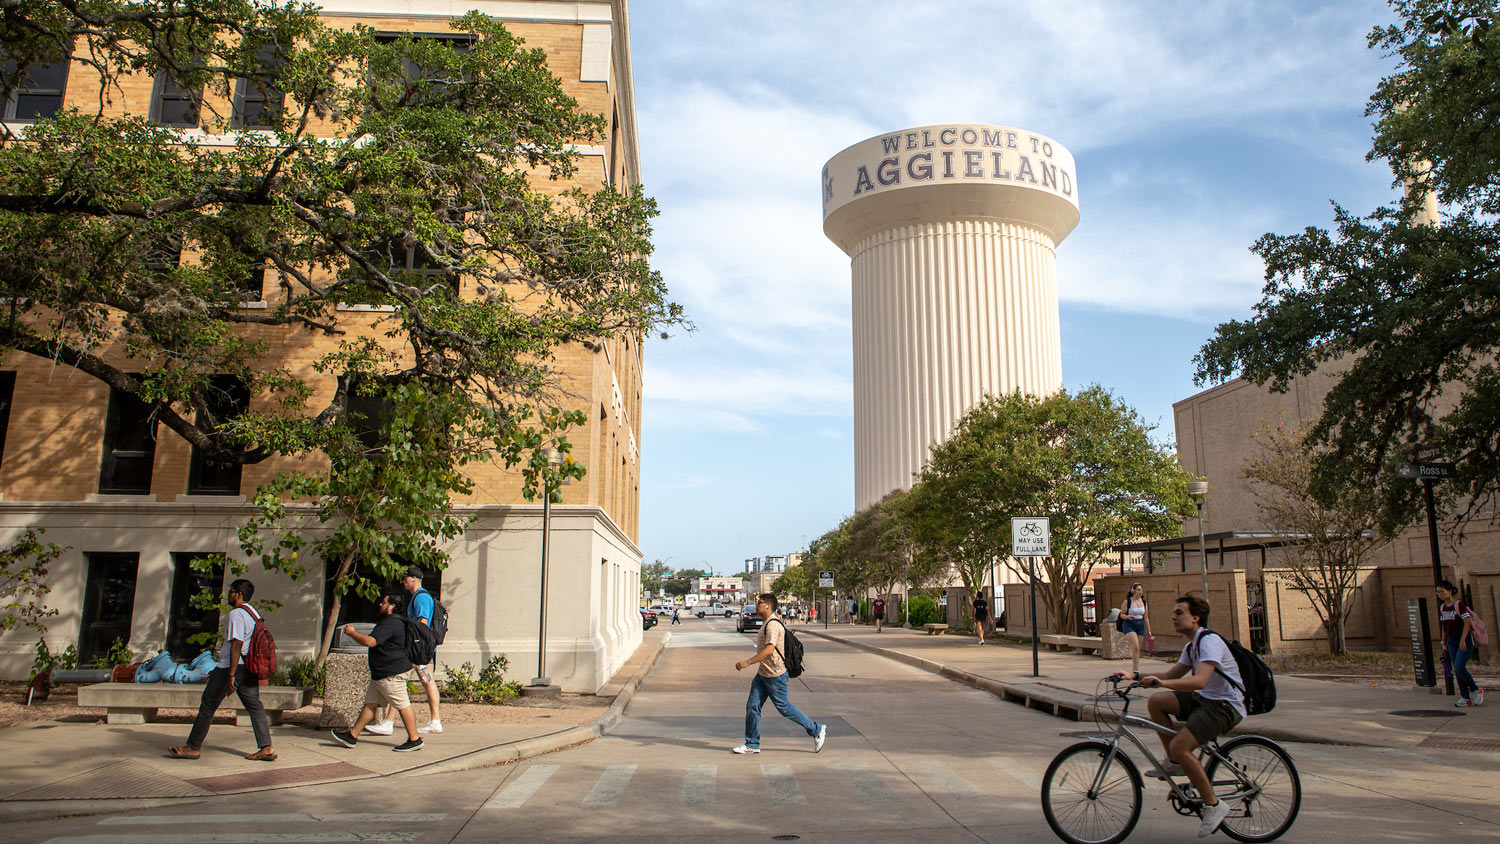 Texas A&M University campus with students walking